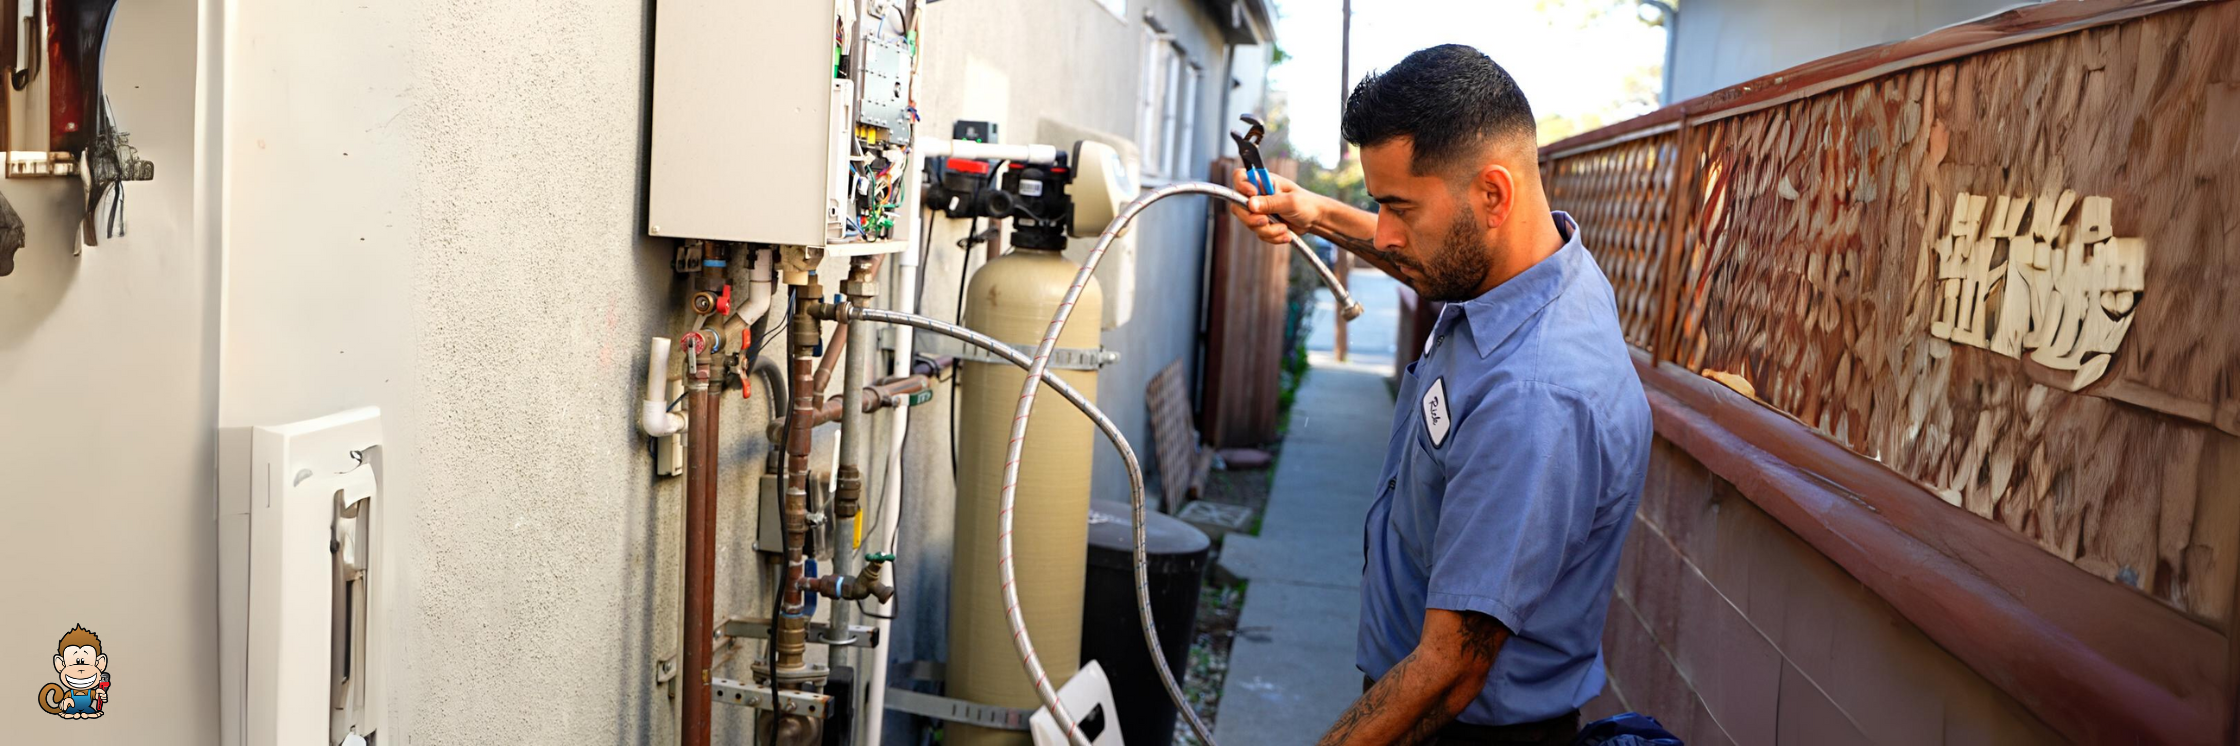 5 Best Tankless Water Heater Installers in Los Angeles County